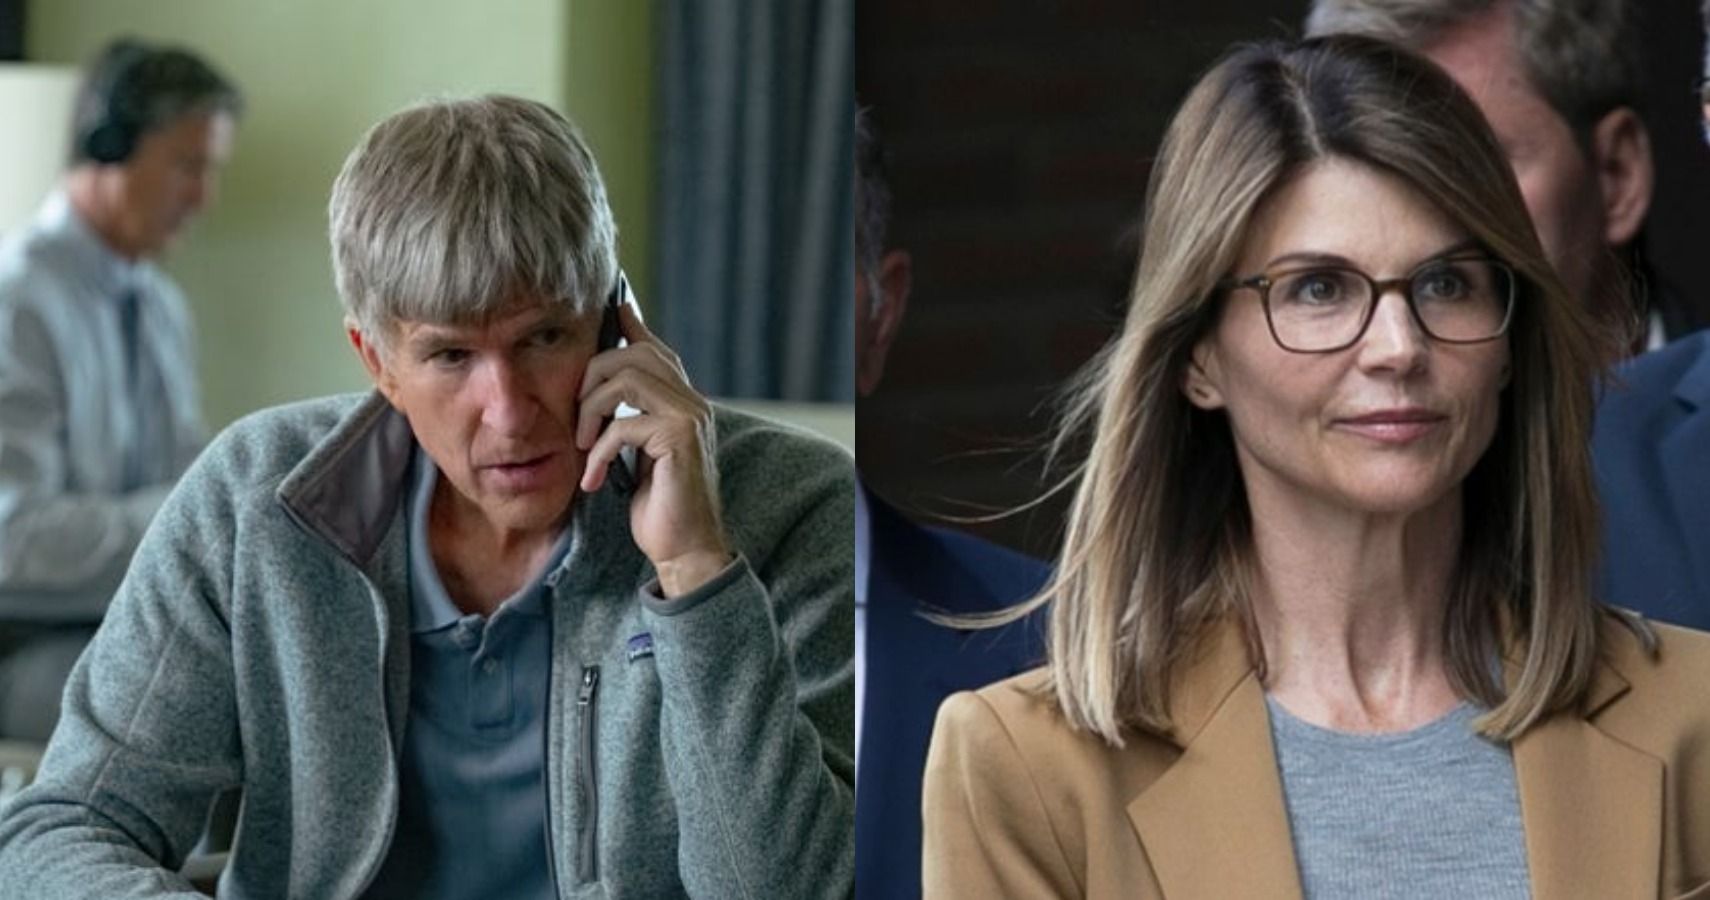 Two images from Operation Varsity Blues The College Admissions Scandal